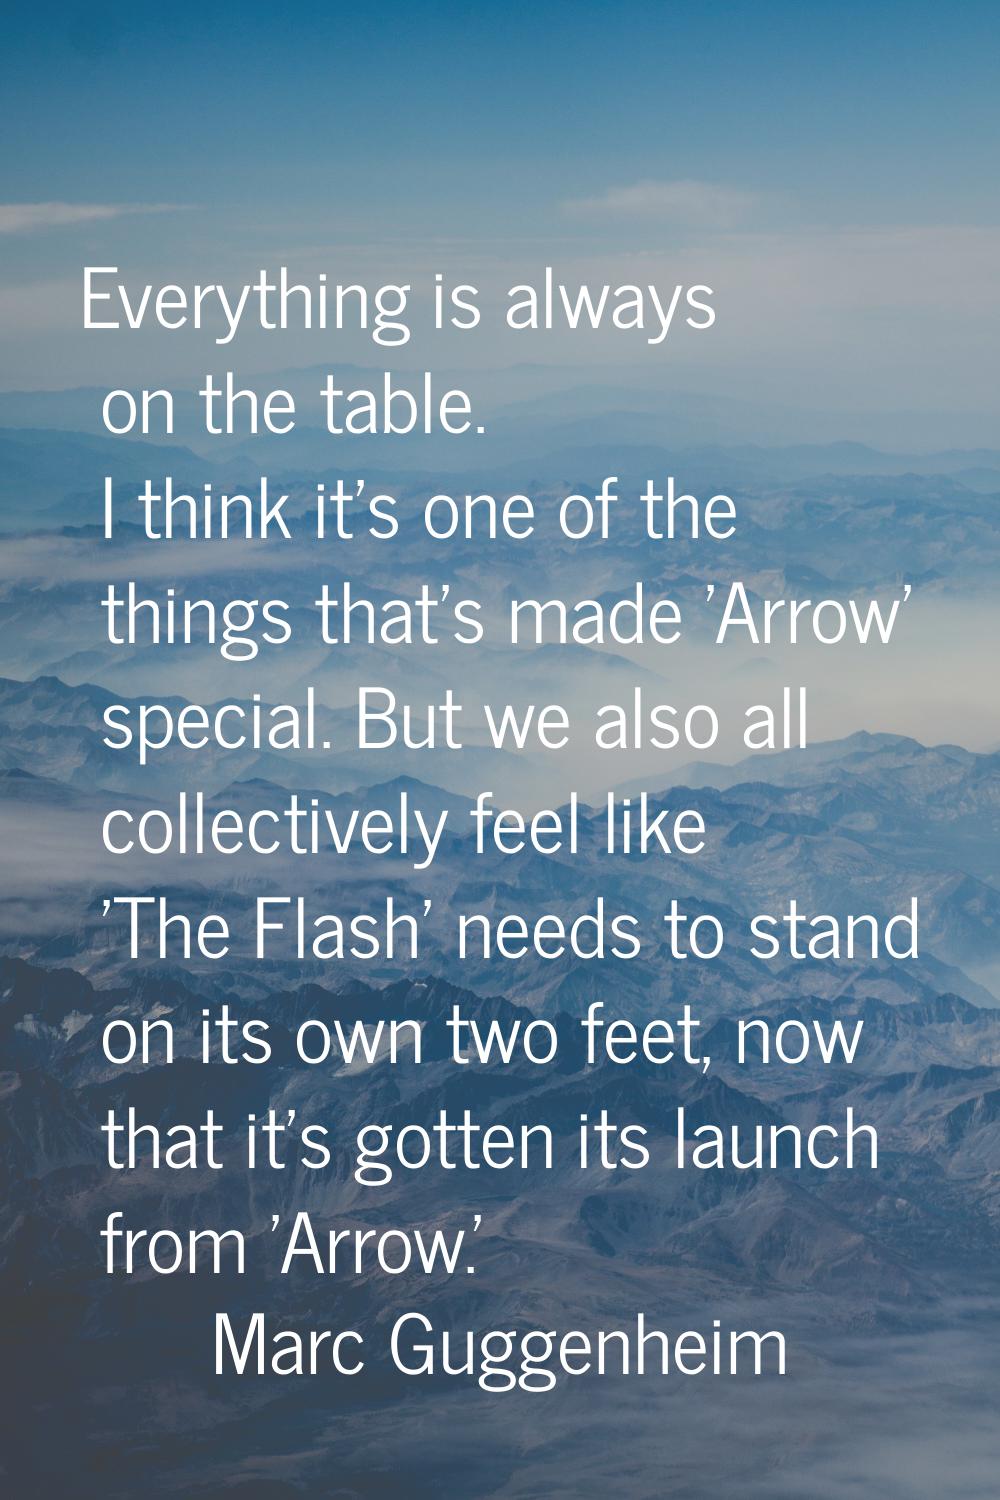 Everything is always on the table. I think it's one of the things that's made 'Arrow' special. But 